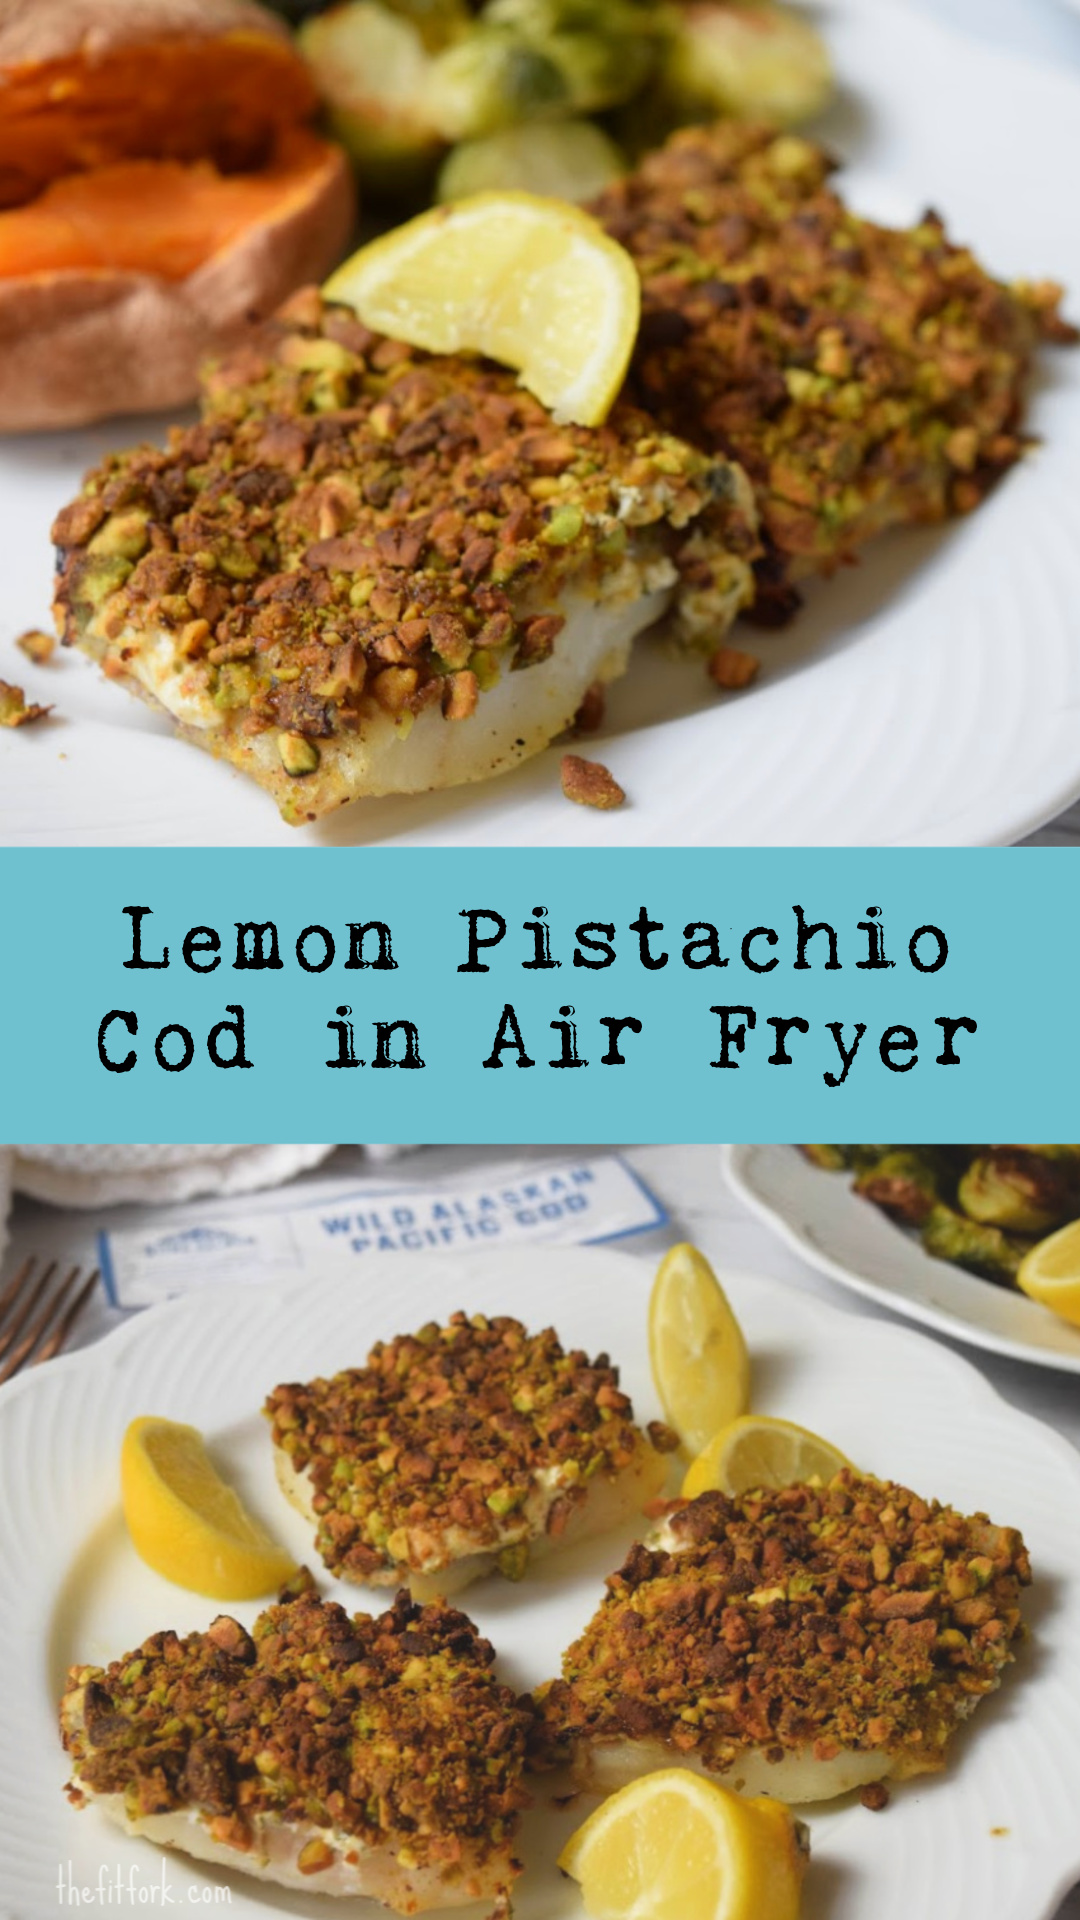 Lemon Pistachio Cod in Air Fryer is a quick, easy, healthy dinner perfect for Mediterranean diets -- low carb and keto, too! 234 calories per serving, 5.5g net carb, and 28g protein.